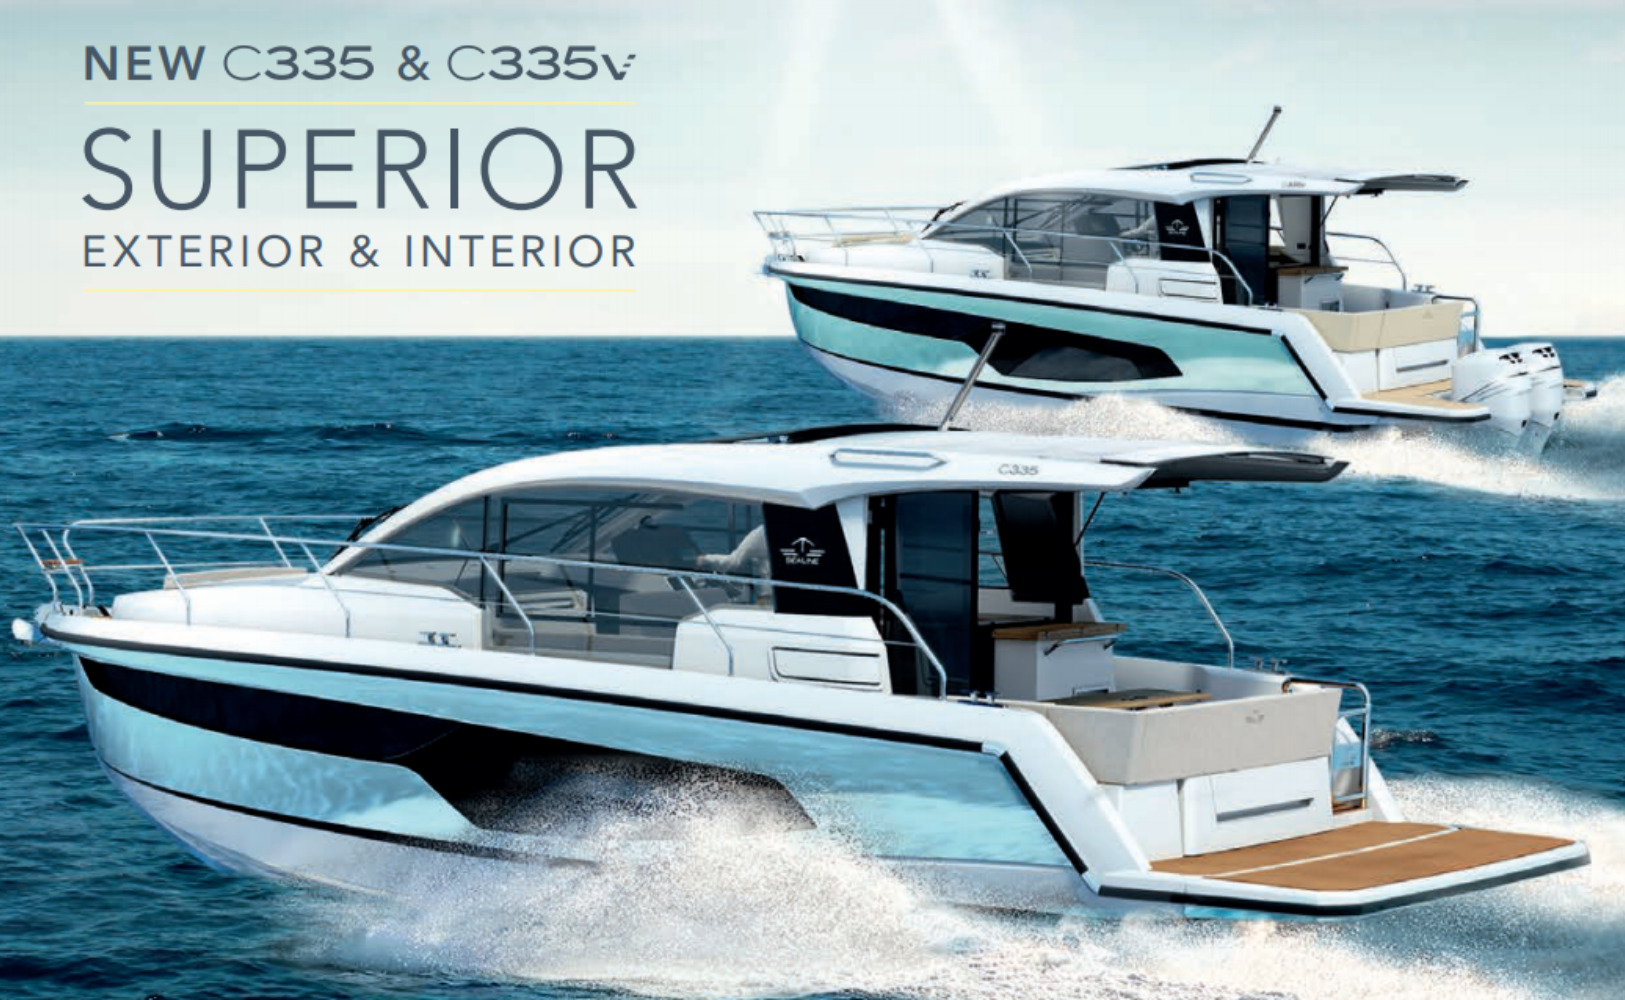 The new Sealine C335 and C335v